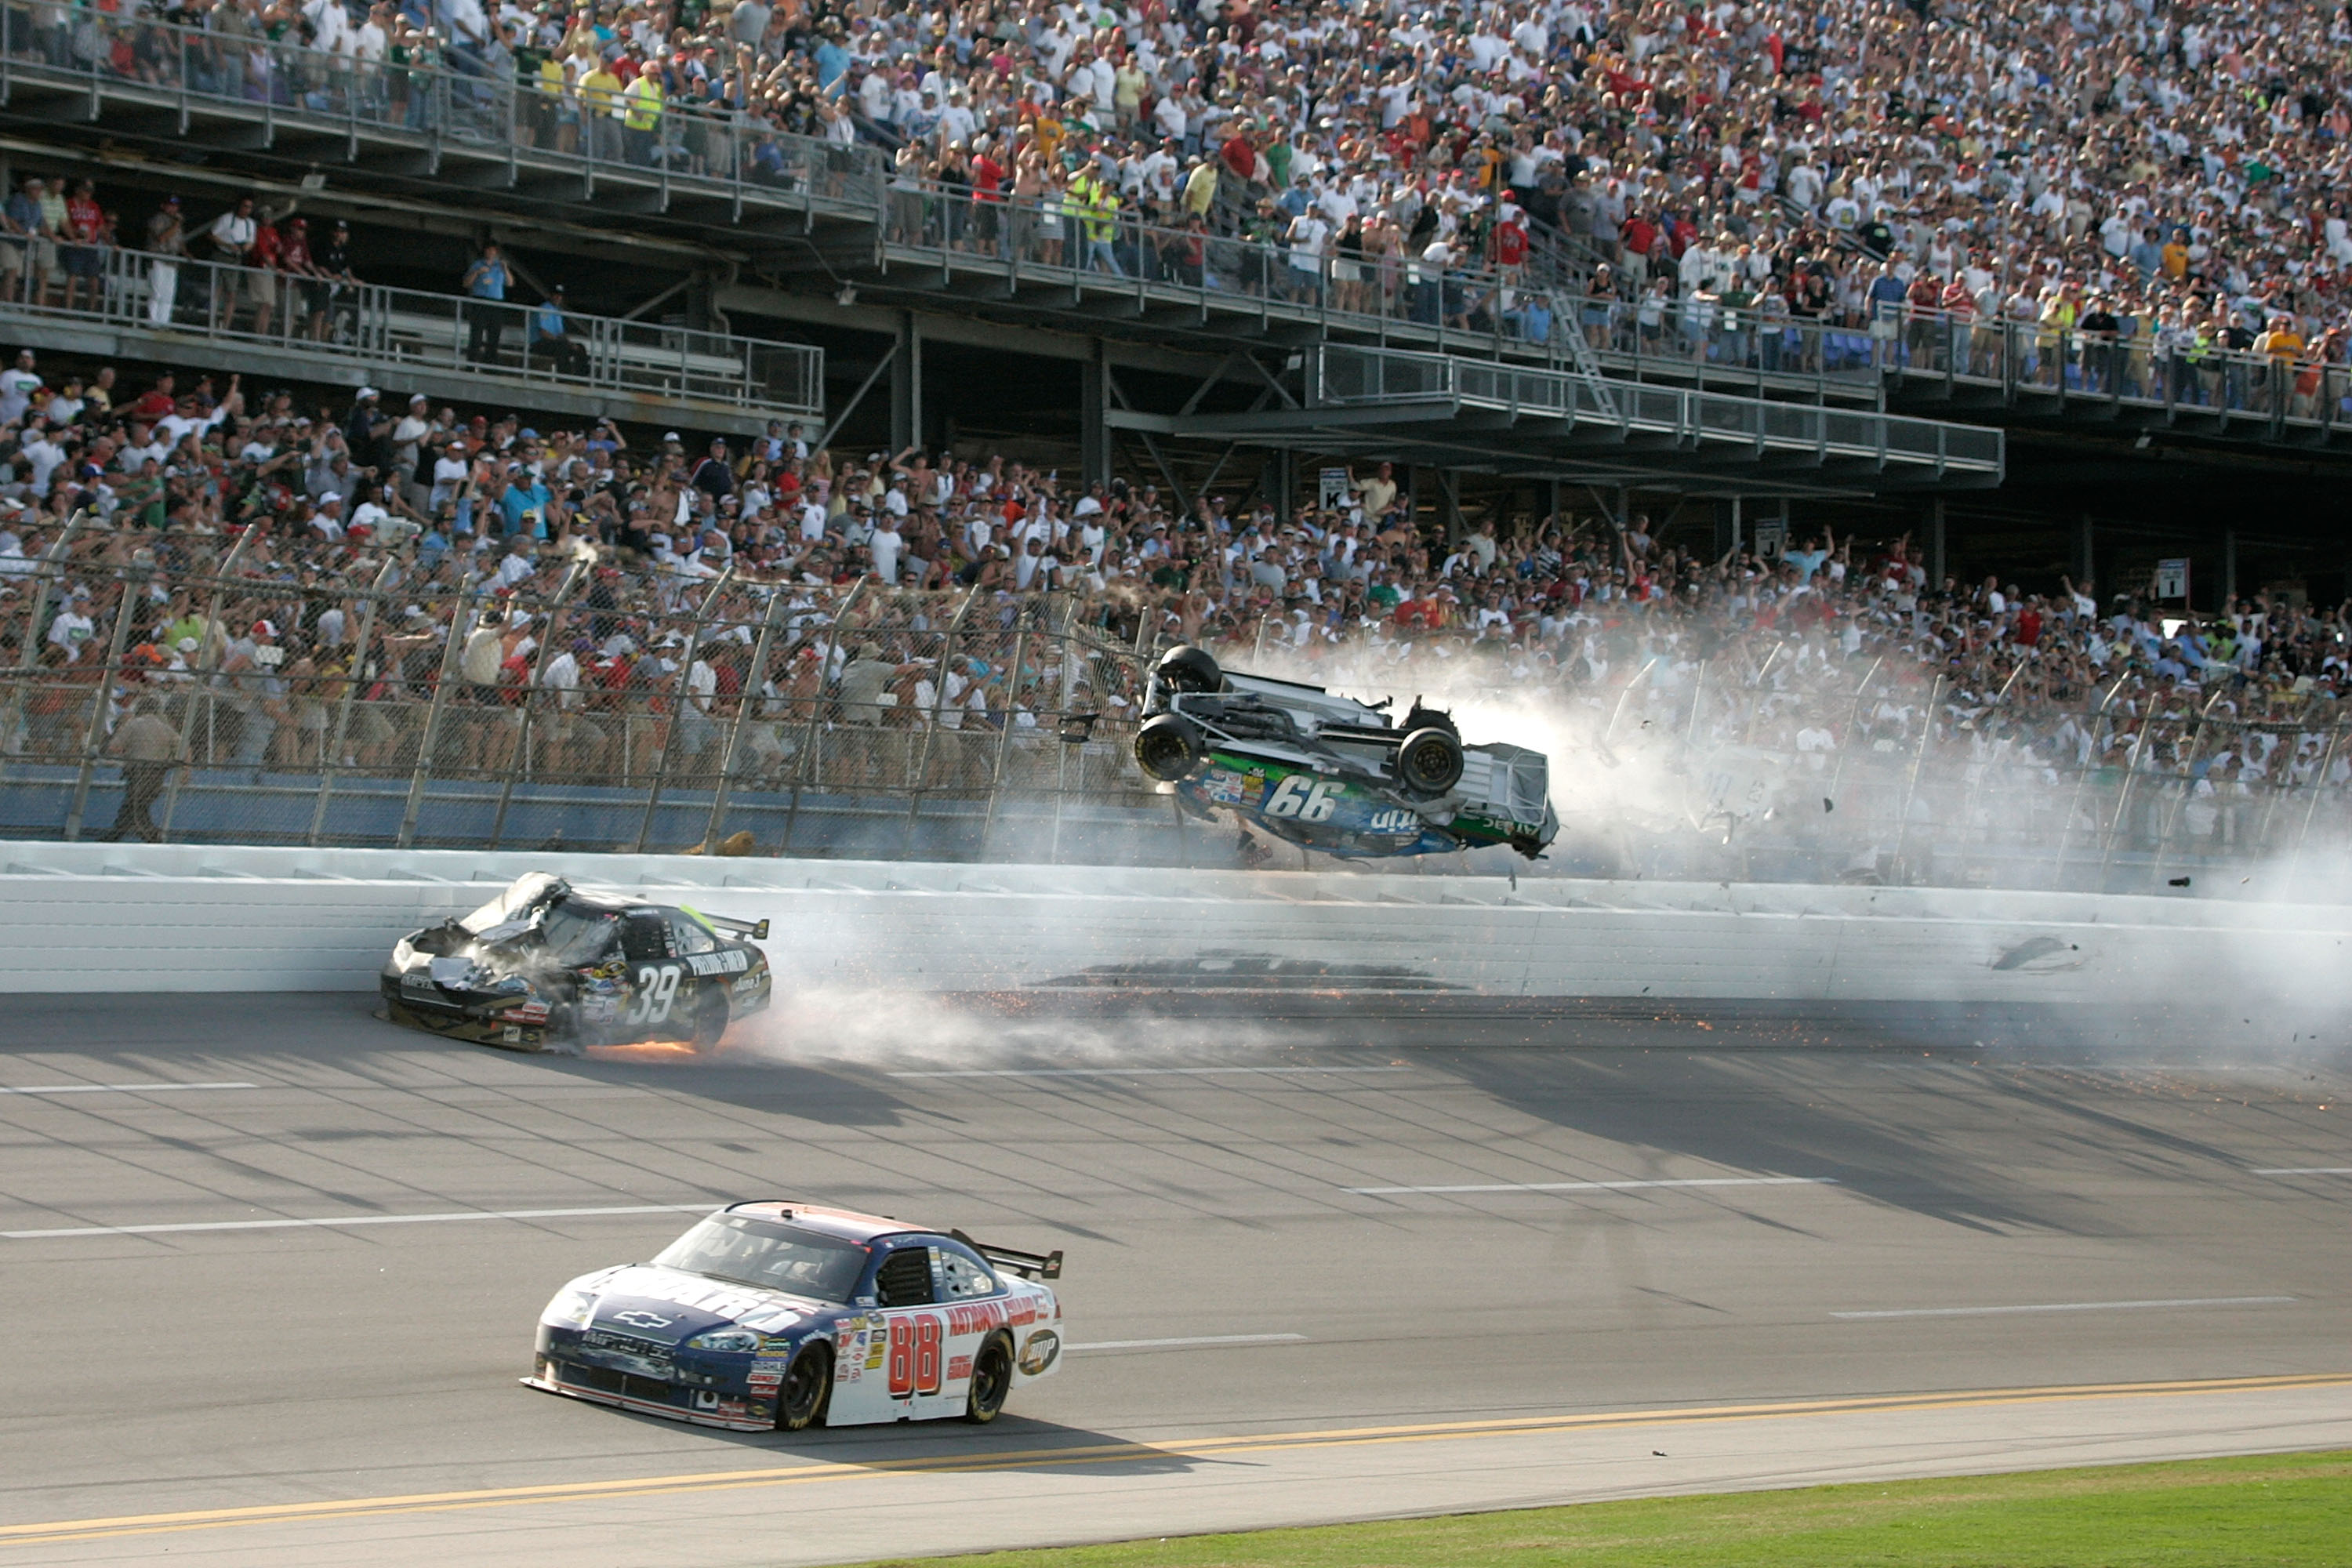 TALLADEGA, AL - APRIL 26: Carl Edwards, driver of the #99 Claritin Ford, goes airborne as Ryan Newman, driver of the #39 Steweart-Haas Racing Chevrolet suffers damage and Dale Earnhardt Jr., driver of the #88 National Guard / AMP Energy Chevrolet drives at the conclusion of the NASCAR Sprint Cup Series Aaron